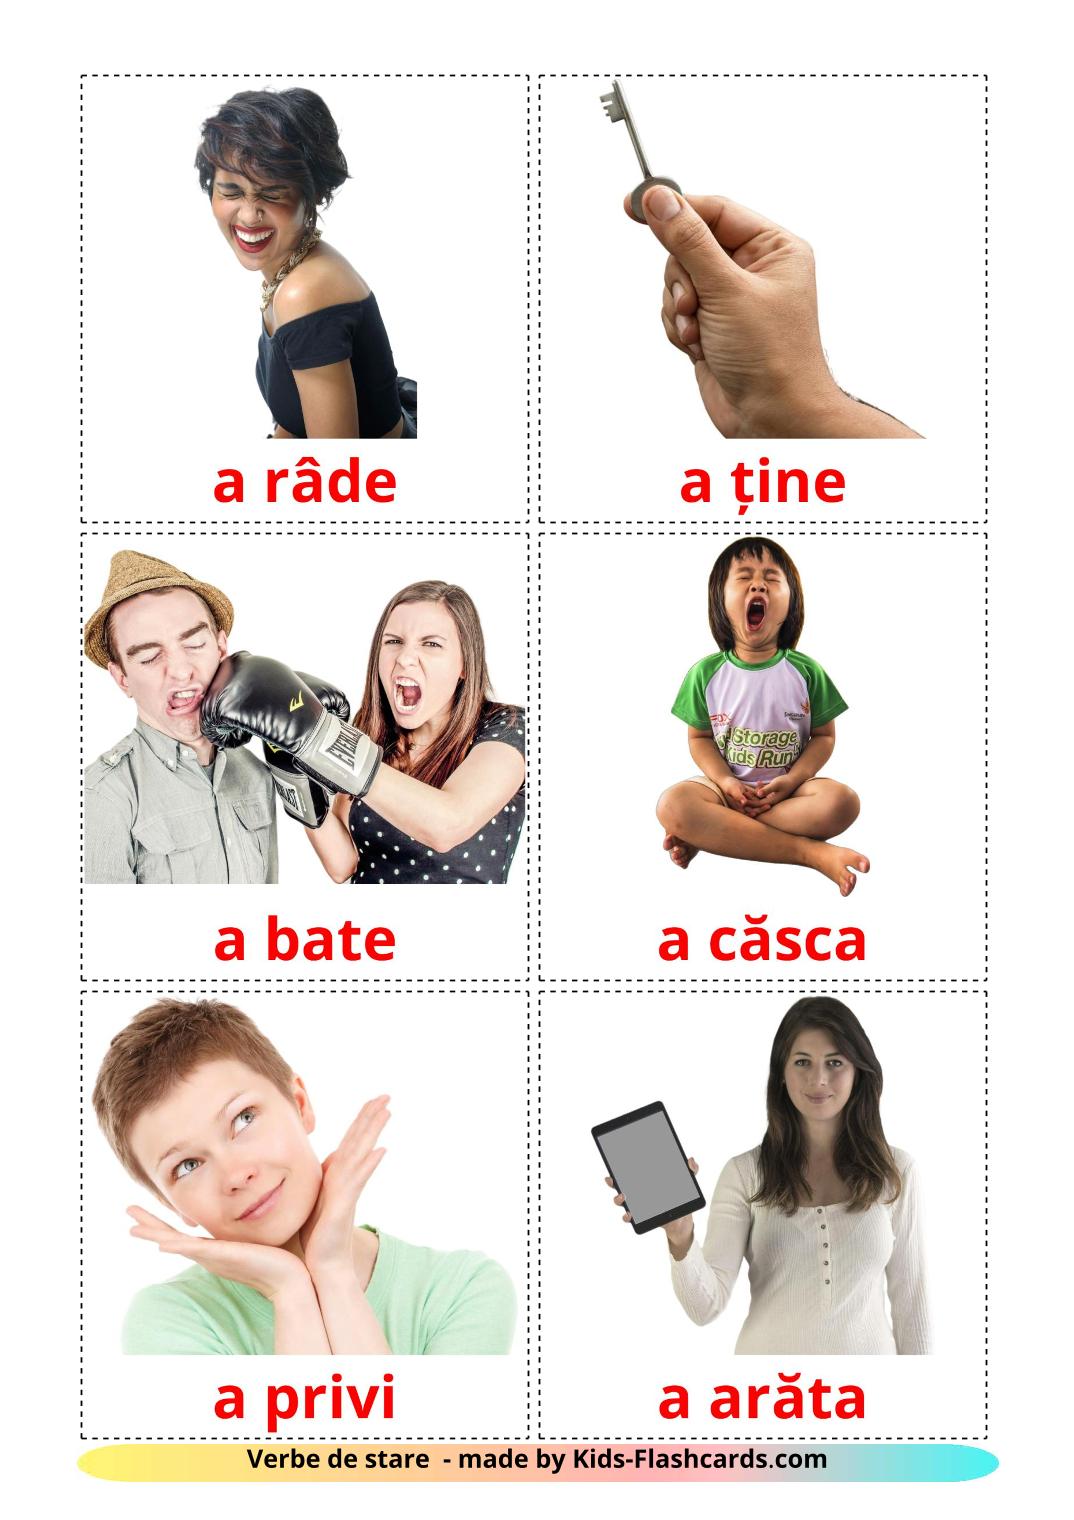 State verbs - 23 Free Printable romanian Flashcards 